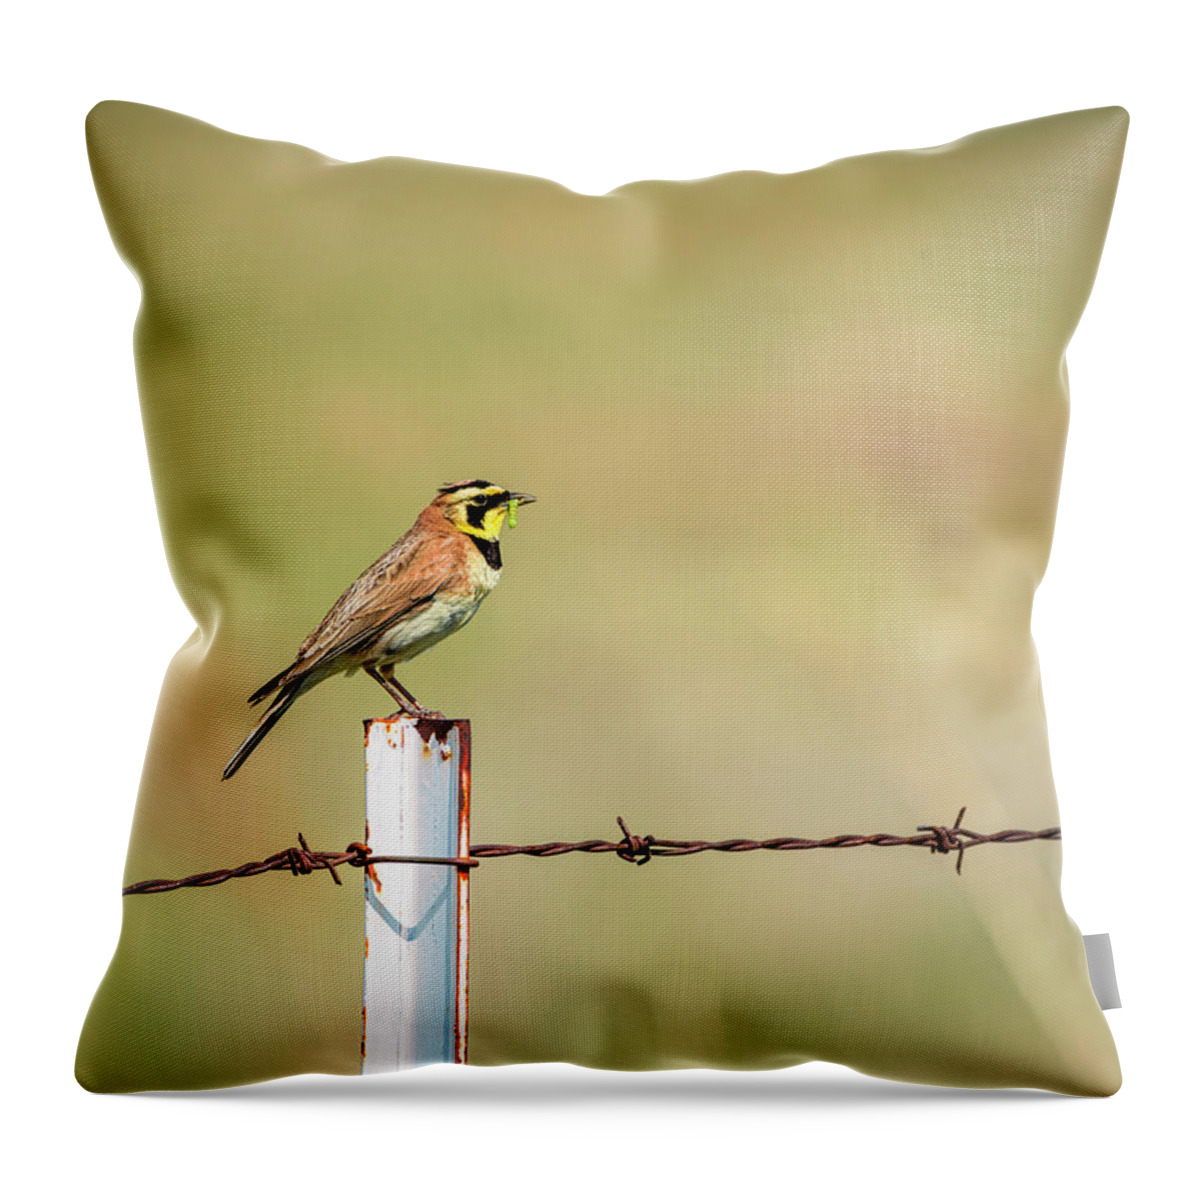 Horned Lark Throw Pillow featuring the photograph I Have Dinner by Pamela Dunn-Parrish